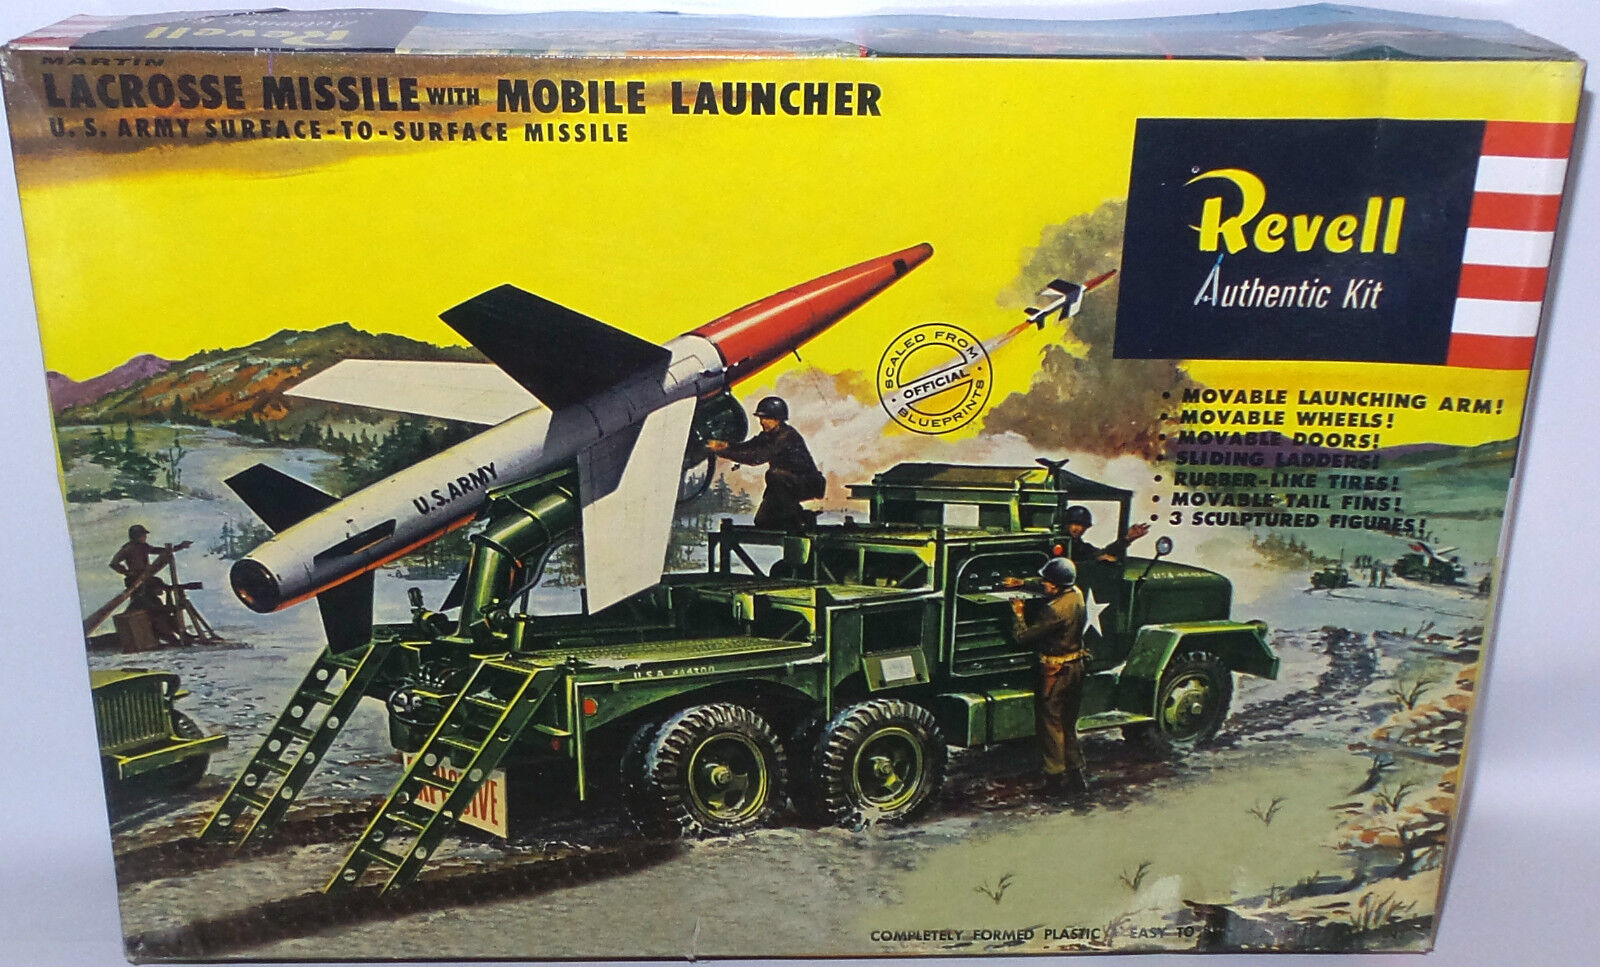 ROCKETS : LACROSSE MISSILE WITH MOBILE LAUNCHER PLASTIC MODEL KIT